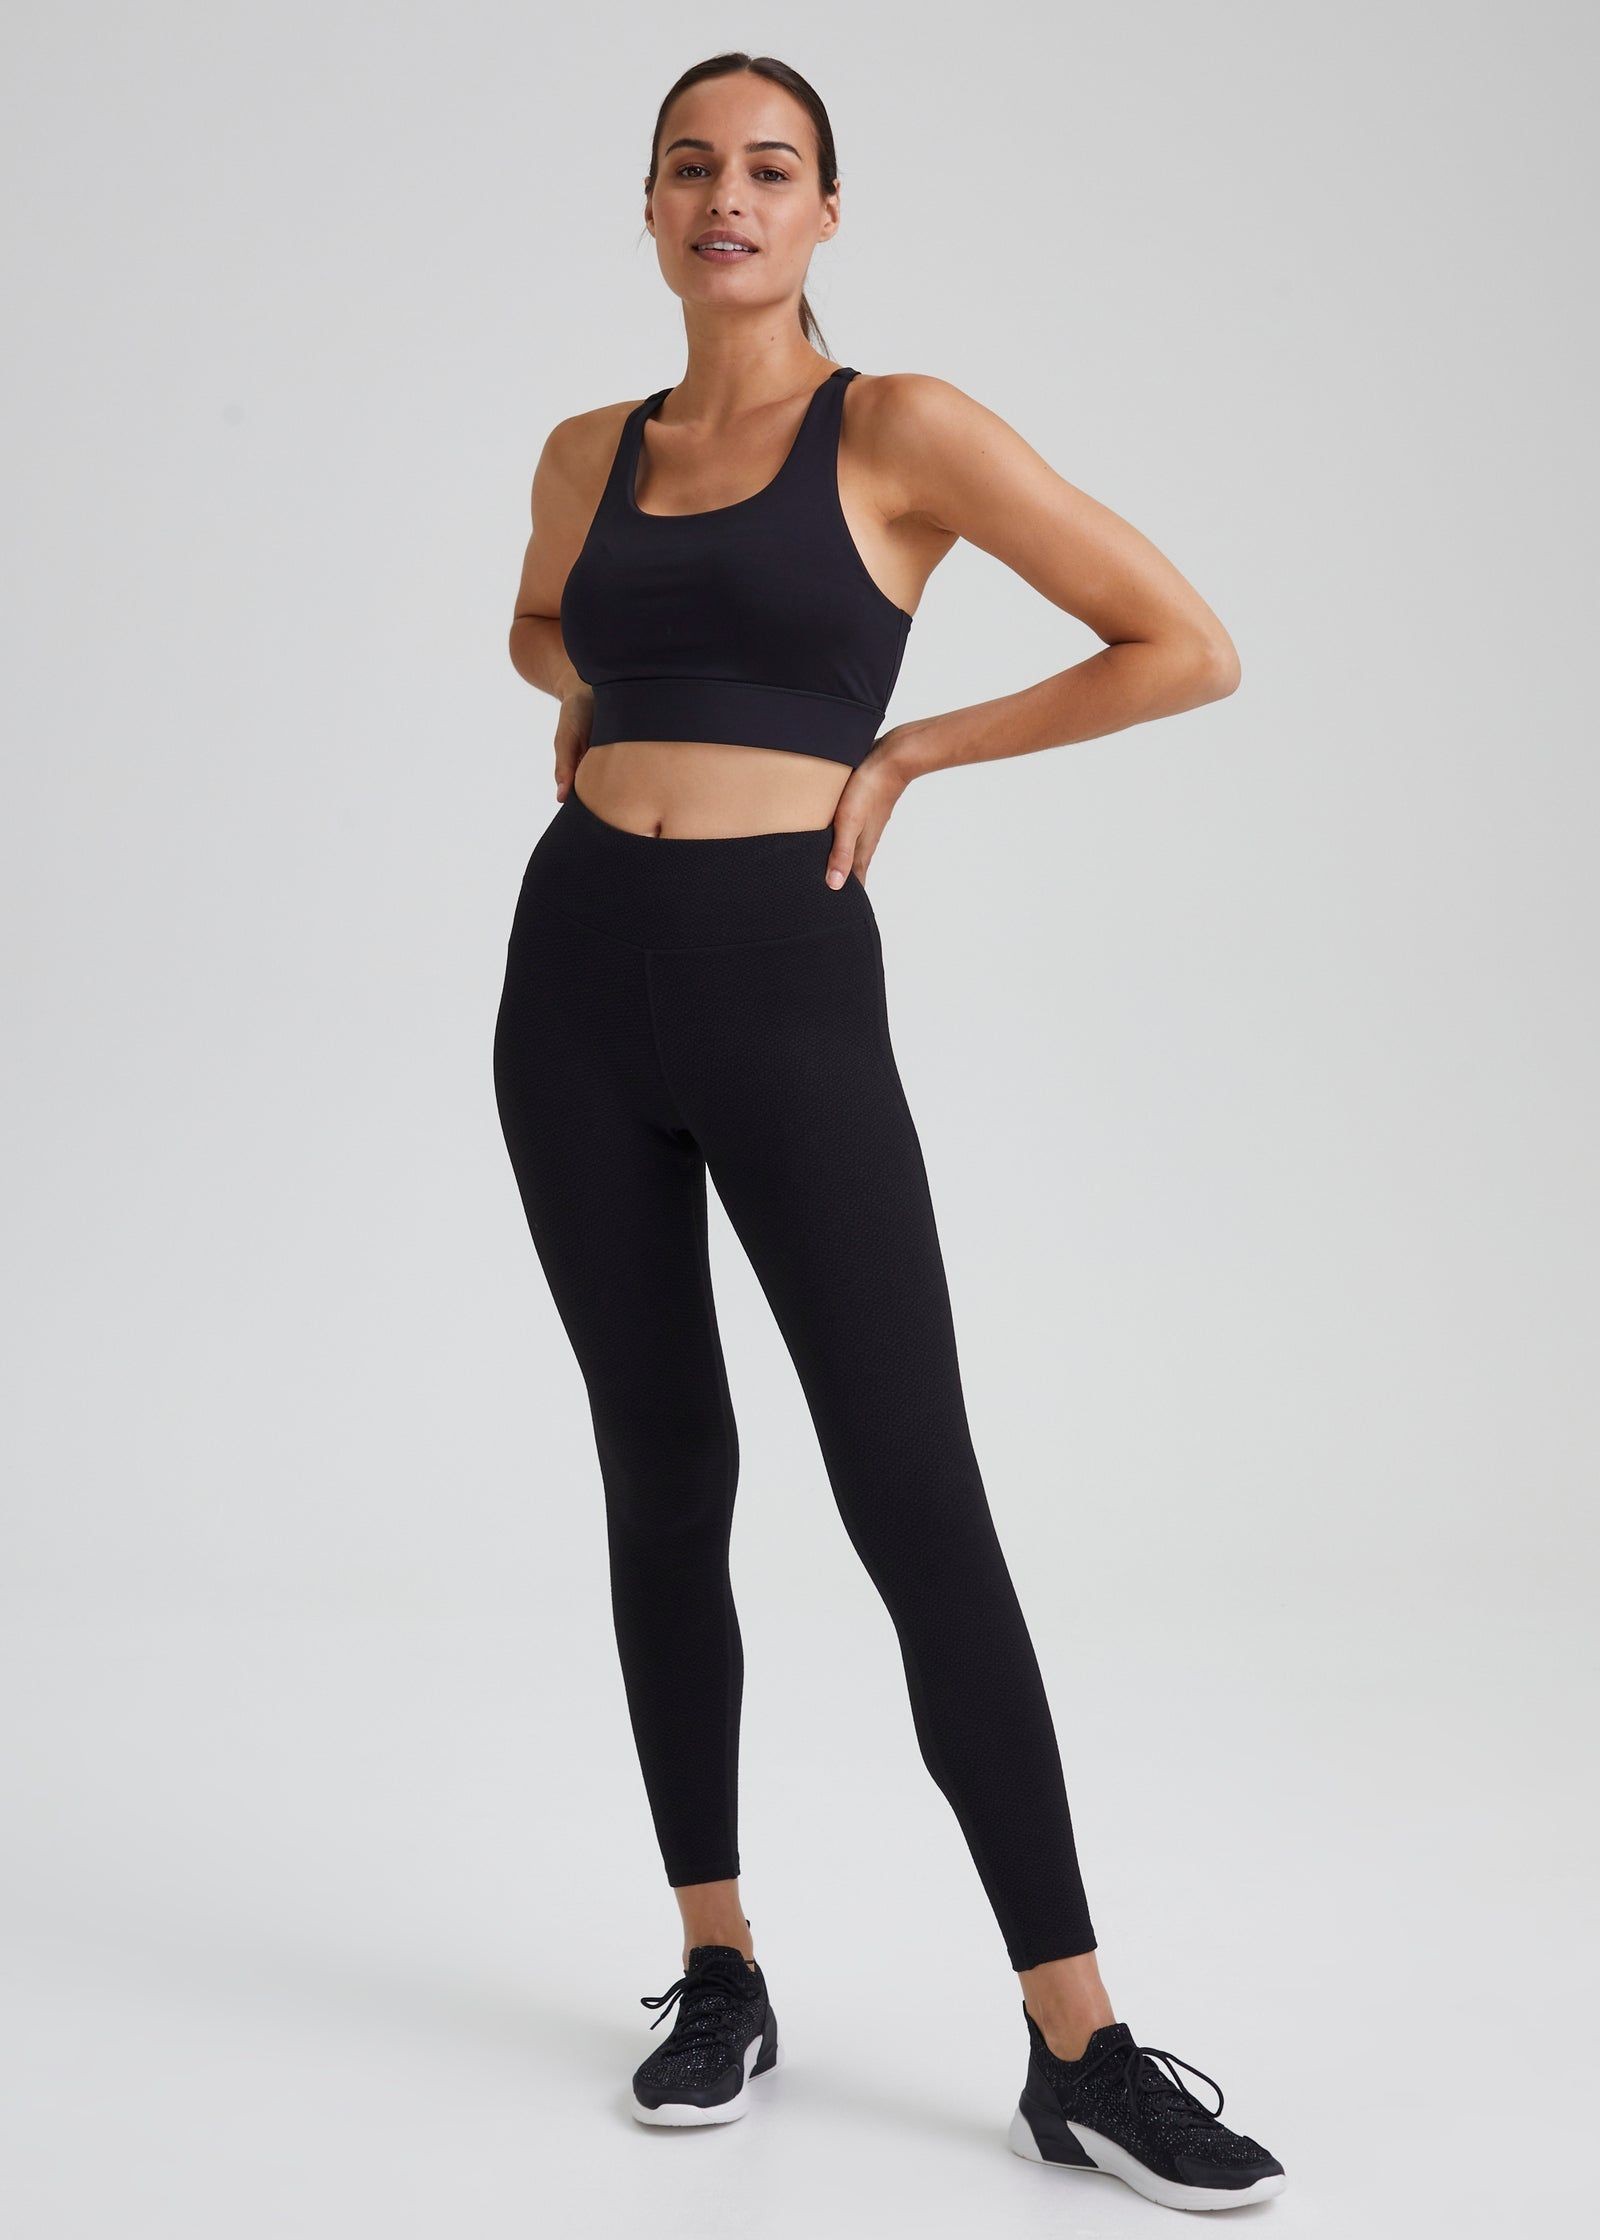 Souluxe Black Ruched Textured Sports Leggings